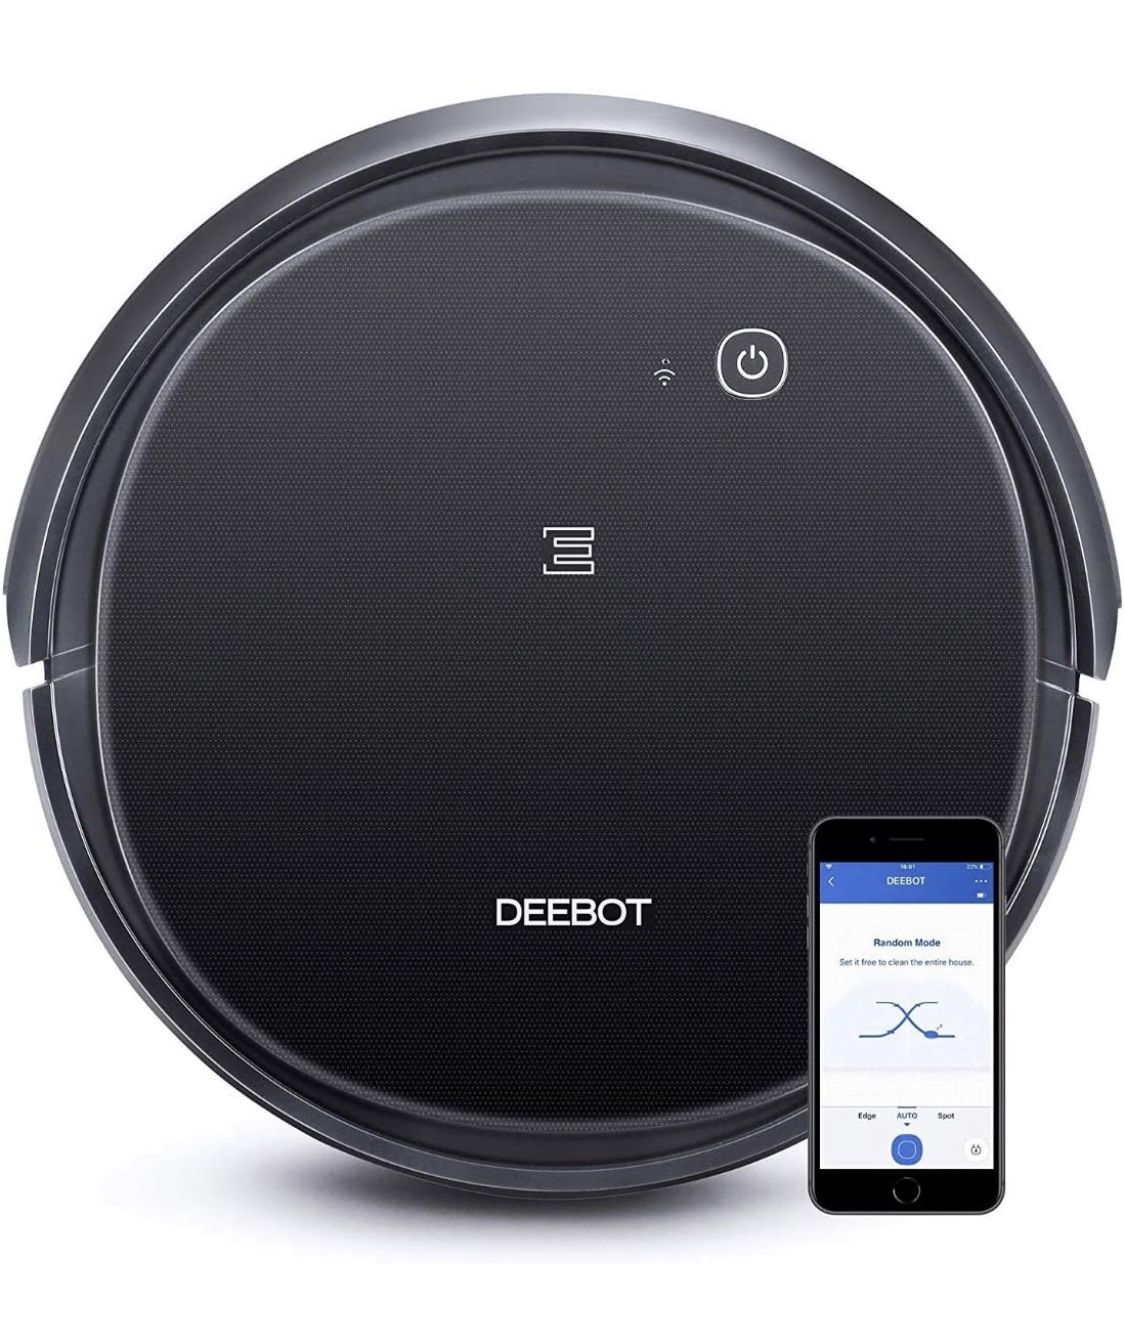 Ecovacs DEEBOT 500 Robot Vacuum Cleaner with Max Power Suction, Up to 110 min Runtime, Hard Floors & Carpets, Pet Hair, App Controls, Self-Charging, Q